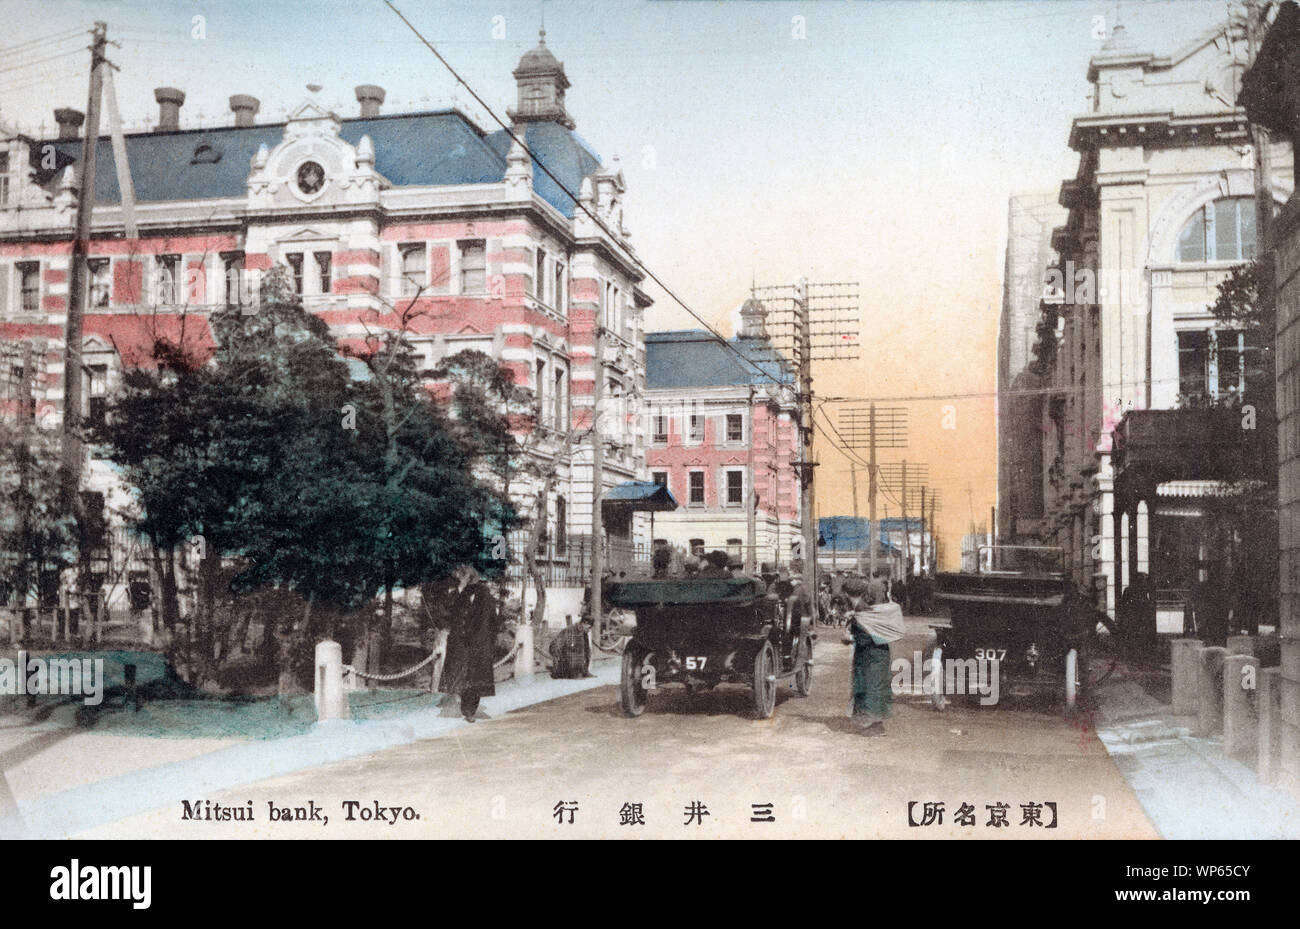 [ 1900s Japan - Mitsui Bank in Tokyo ] —   Mitsui Bank in Tokyo.  The steel frame enforced brick building was designed by Tamisuke Yokokawa and completed in 1902 (Meiji 35).  The company was originally founded as Echigoya by Mitsui Takatoshi (1622–1694) in Mie prefecture. On July 1, 1876 (Meiji 9), the company founded Japan’s first private bank, Mitsui Bank.  The bank survives as the Sumitomo Mitsui Banking Corporation.  20th century vintage postcard. Stock Photo